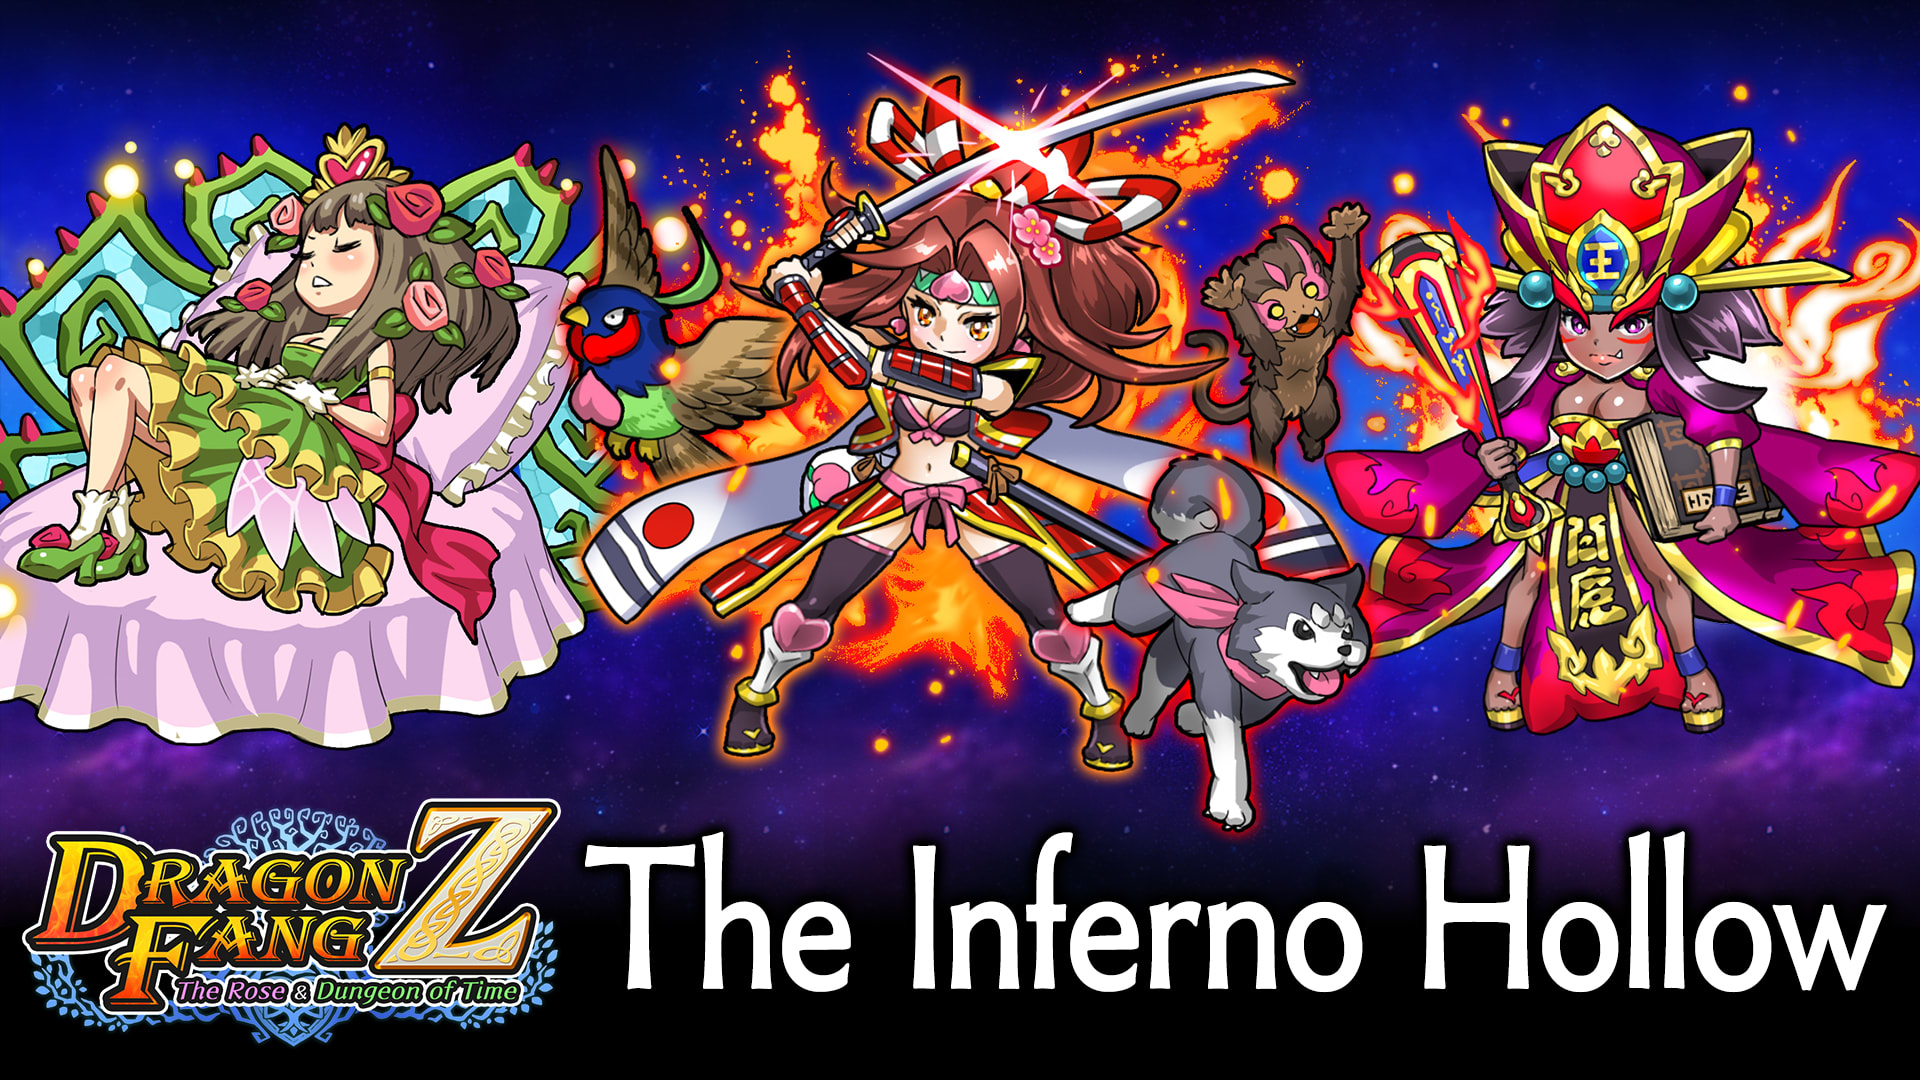 Extra Dungeon "The Inferno Hollow"